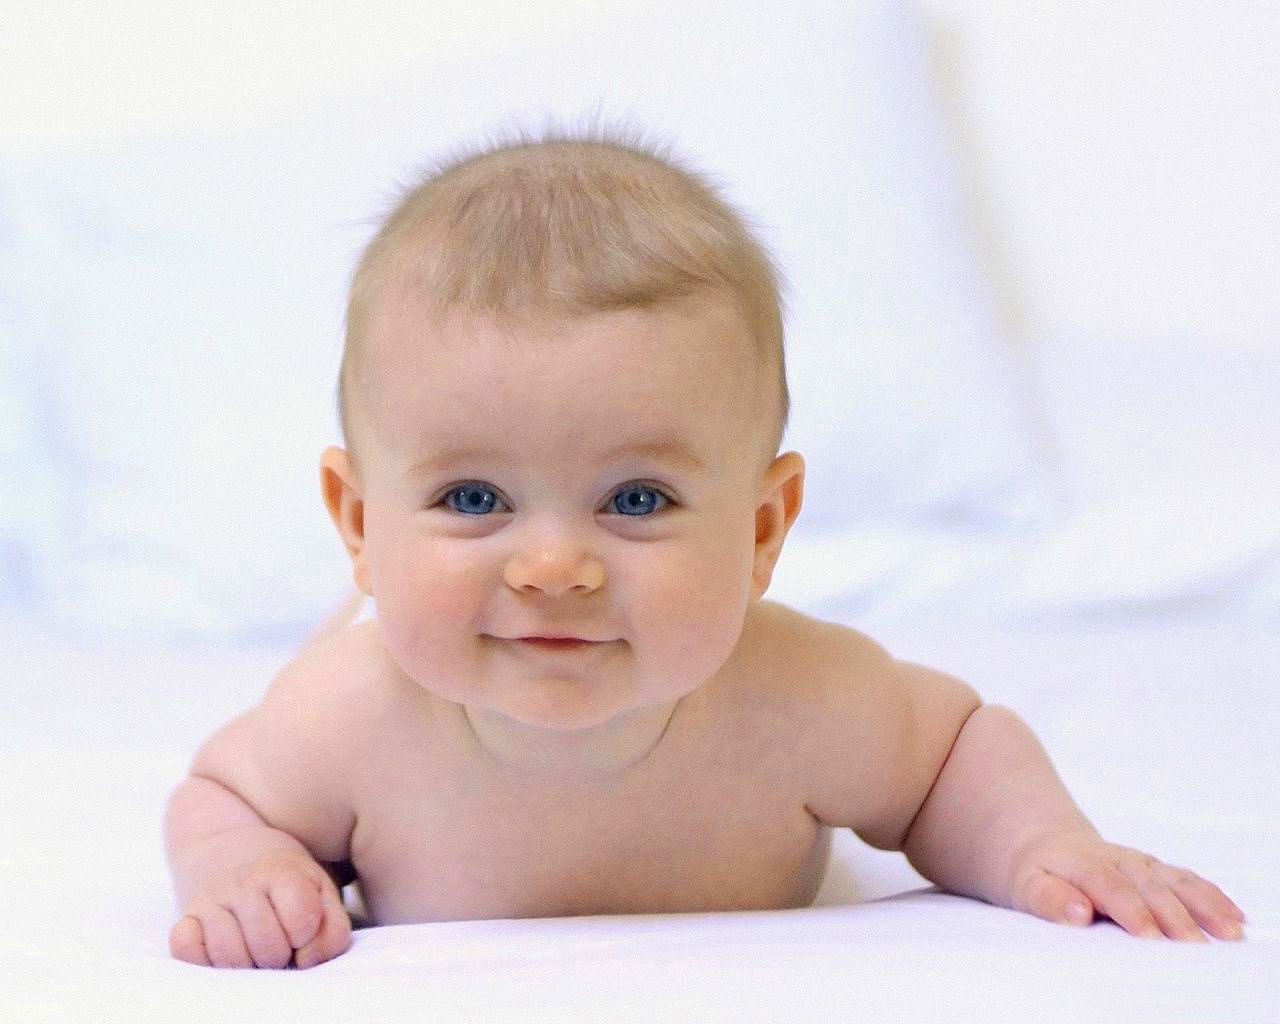 Free Sweet Cute Babies Smile Desktop Wallpaper HD Is The Best Answer For All Stupid Questions HD Wallpaper